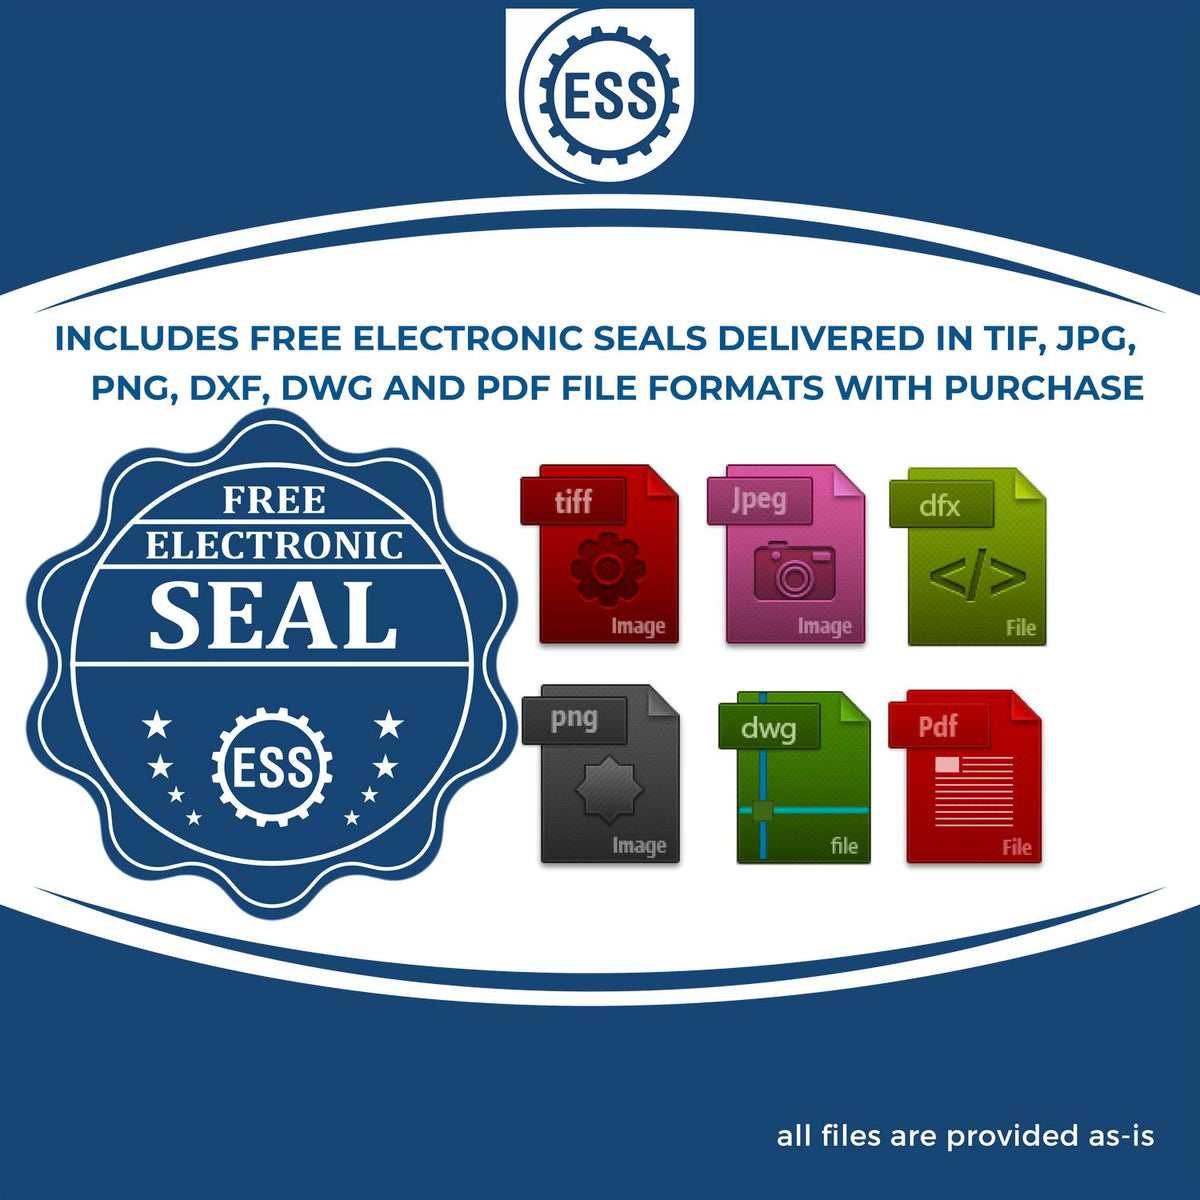 An infographic for the free electronic seal for the Slim Pre-Inked Hawaii Professional Geologist Seal Stamp illustrating the different file type icons such as DXF, DWG, TIF, JPG and PNG.